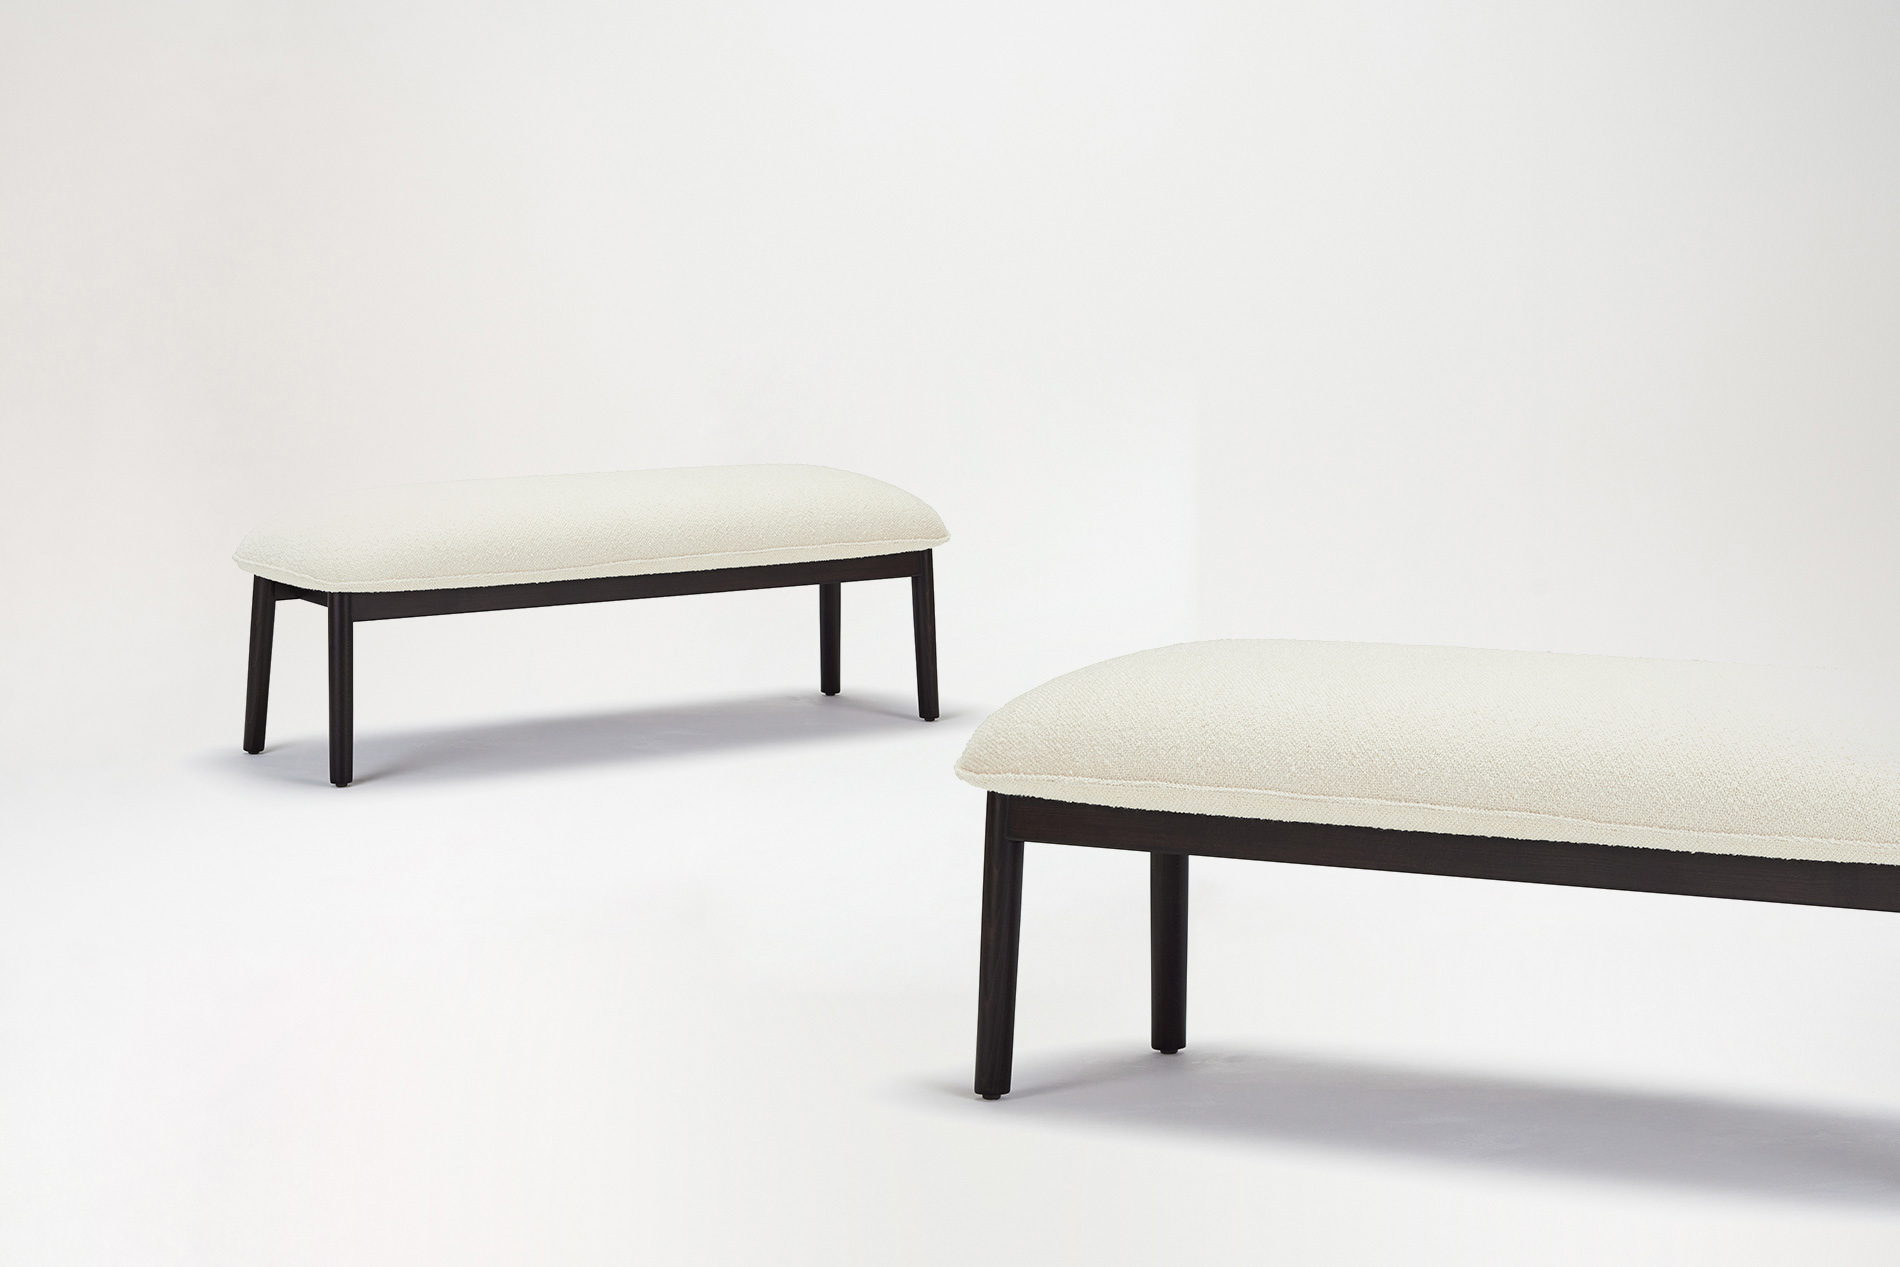 The evolution came very quickly, the idea was very square at first then chamfering the base upholstery gave it a unique looking form.CAROLINA BENCH 